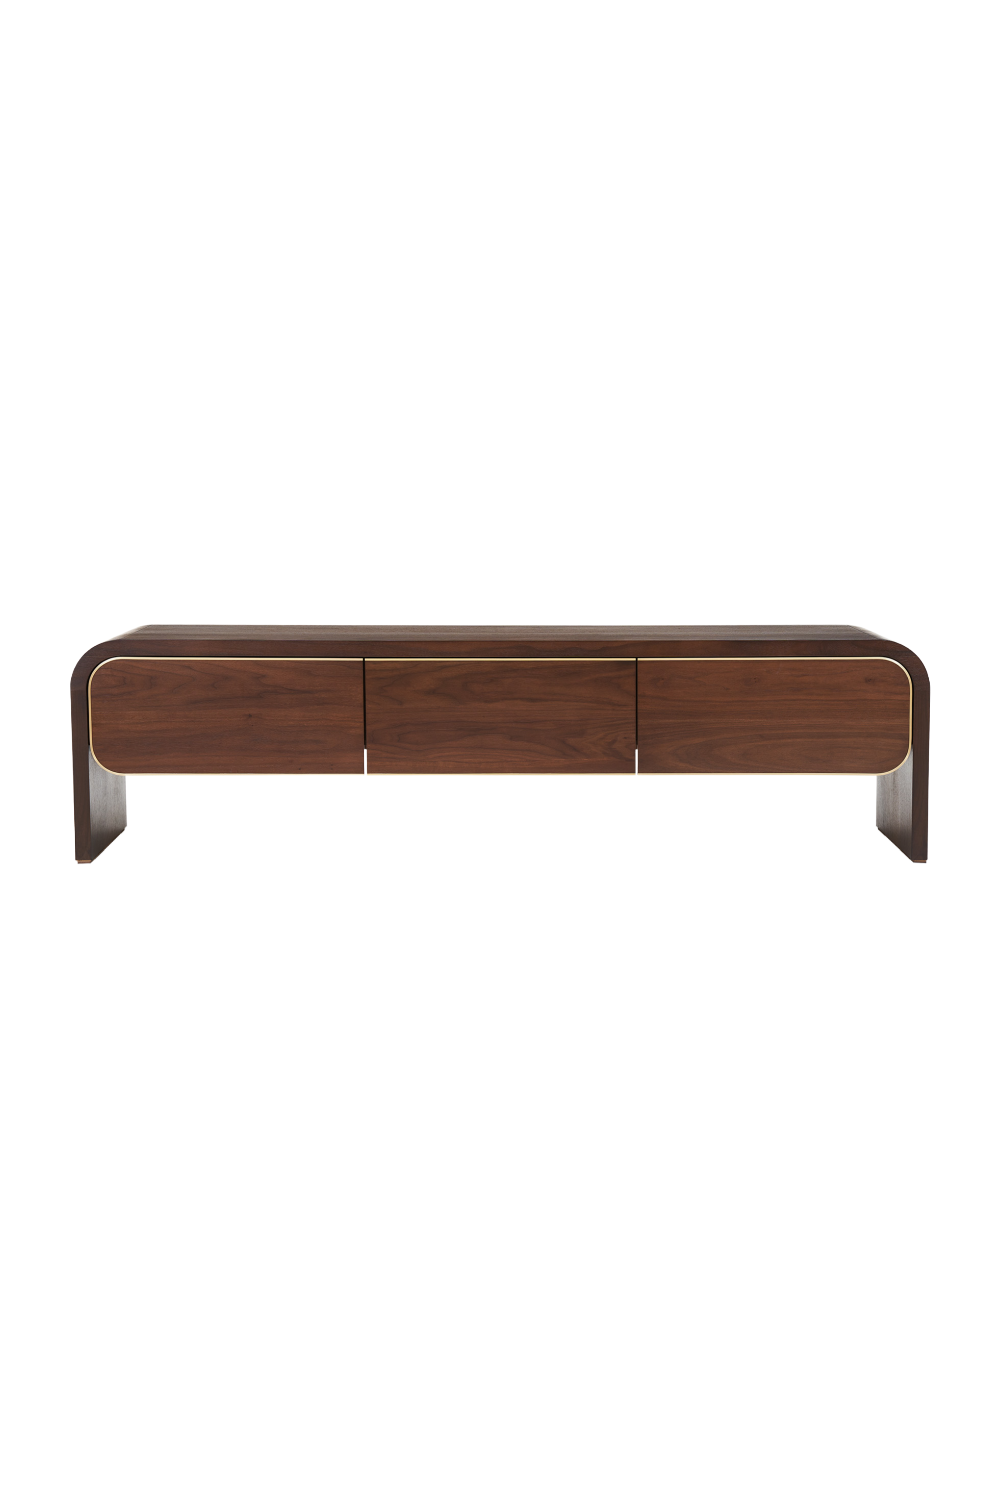 Wooden 3-Drawer Media Sideboard | Liang & Eimil Walter | Oroa.com